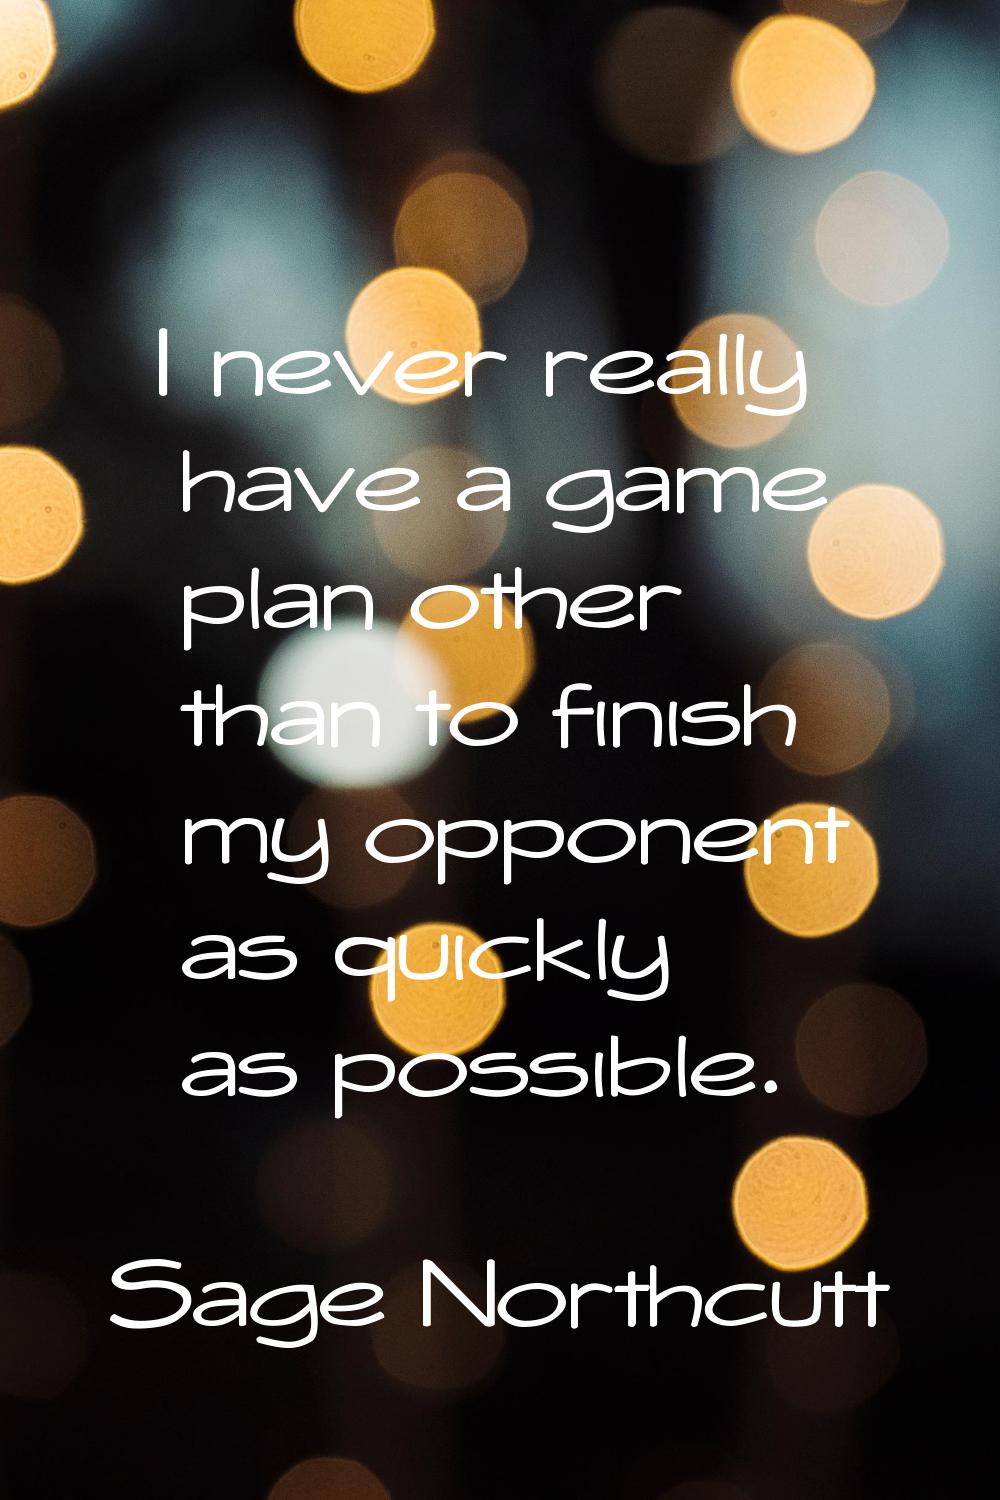 I never really have a game plan other than to finish my opponent as quickly as possible.